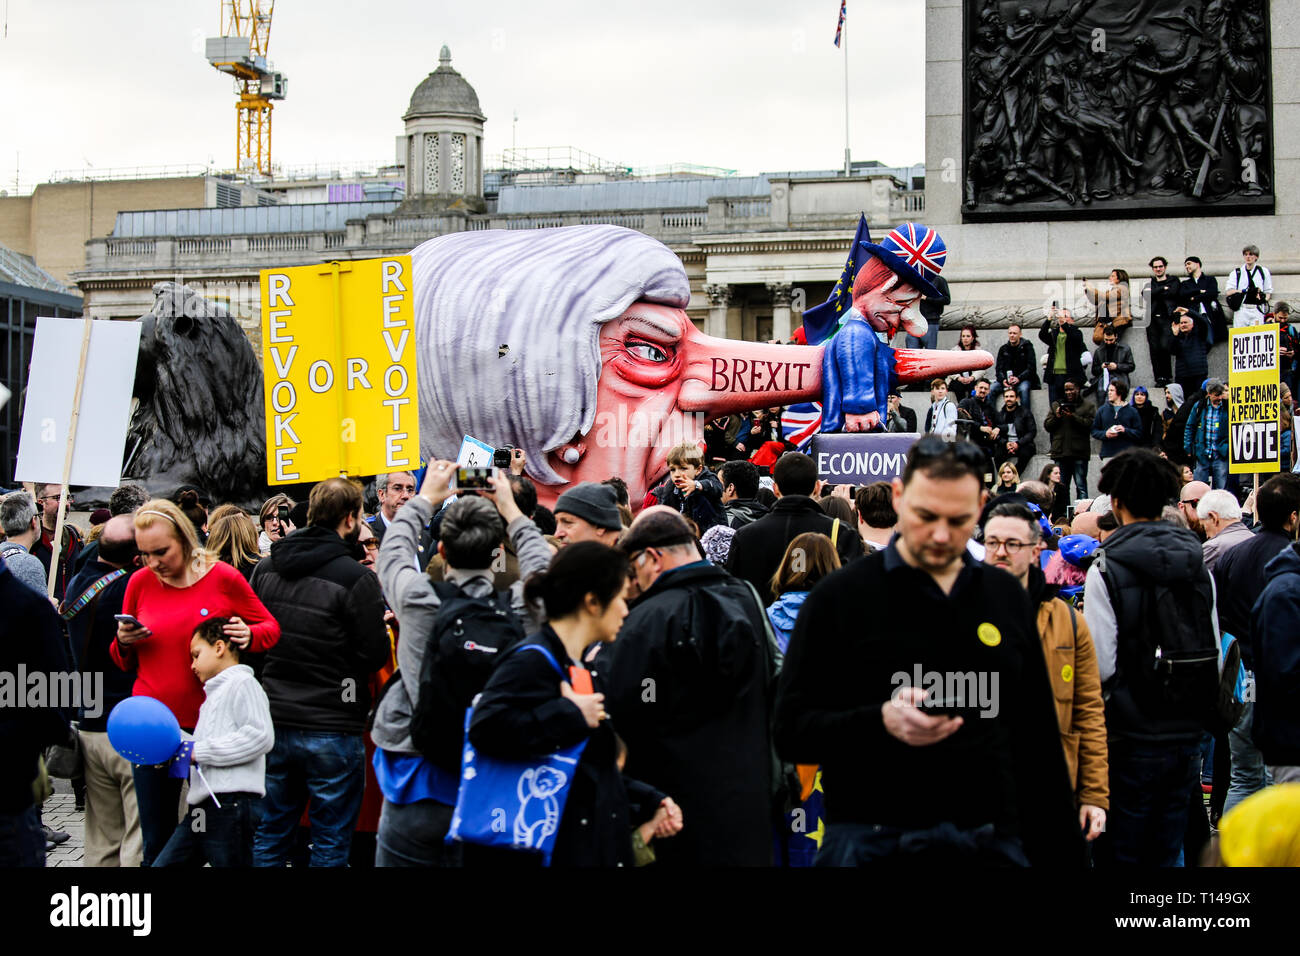 Caricature of Theresa may, Brexit written on her nose, with her nose impaling a figure of a man holding two suitcases labelled 'The economy' The People's Vote March, London, March 2019 Stock Photo